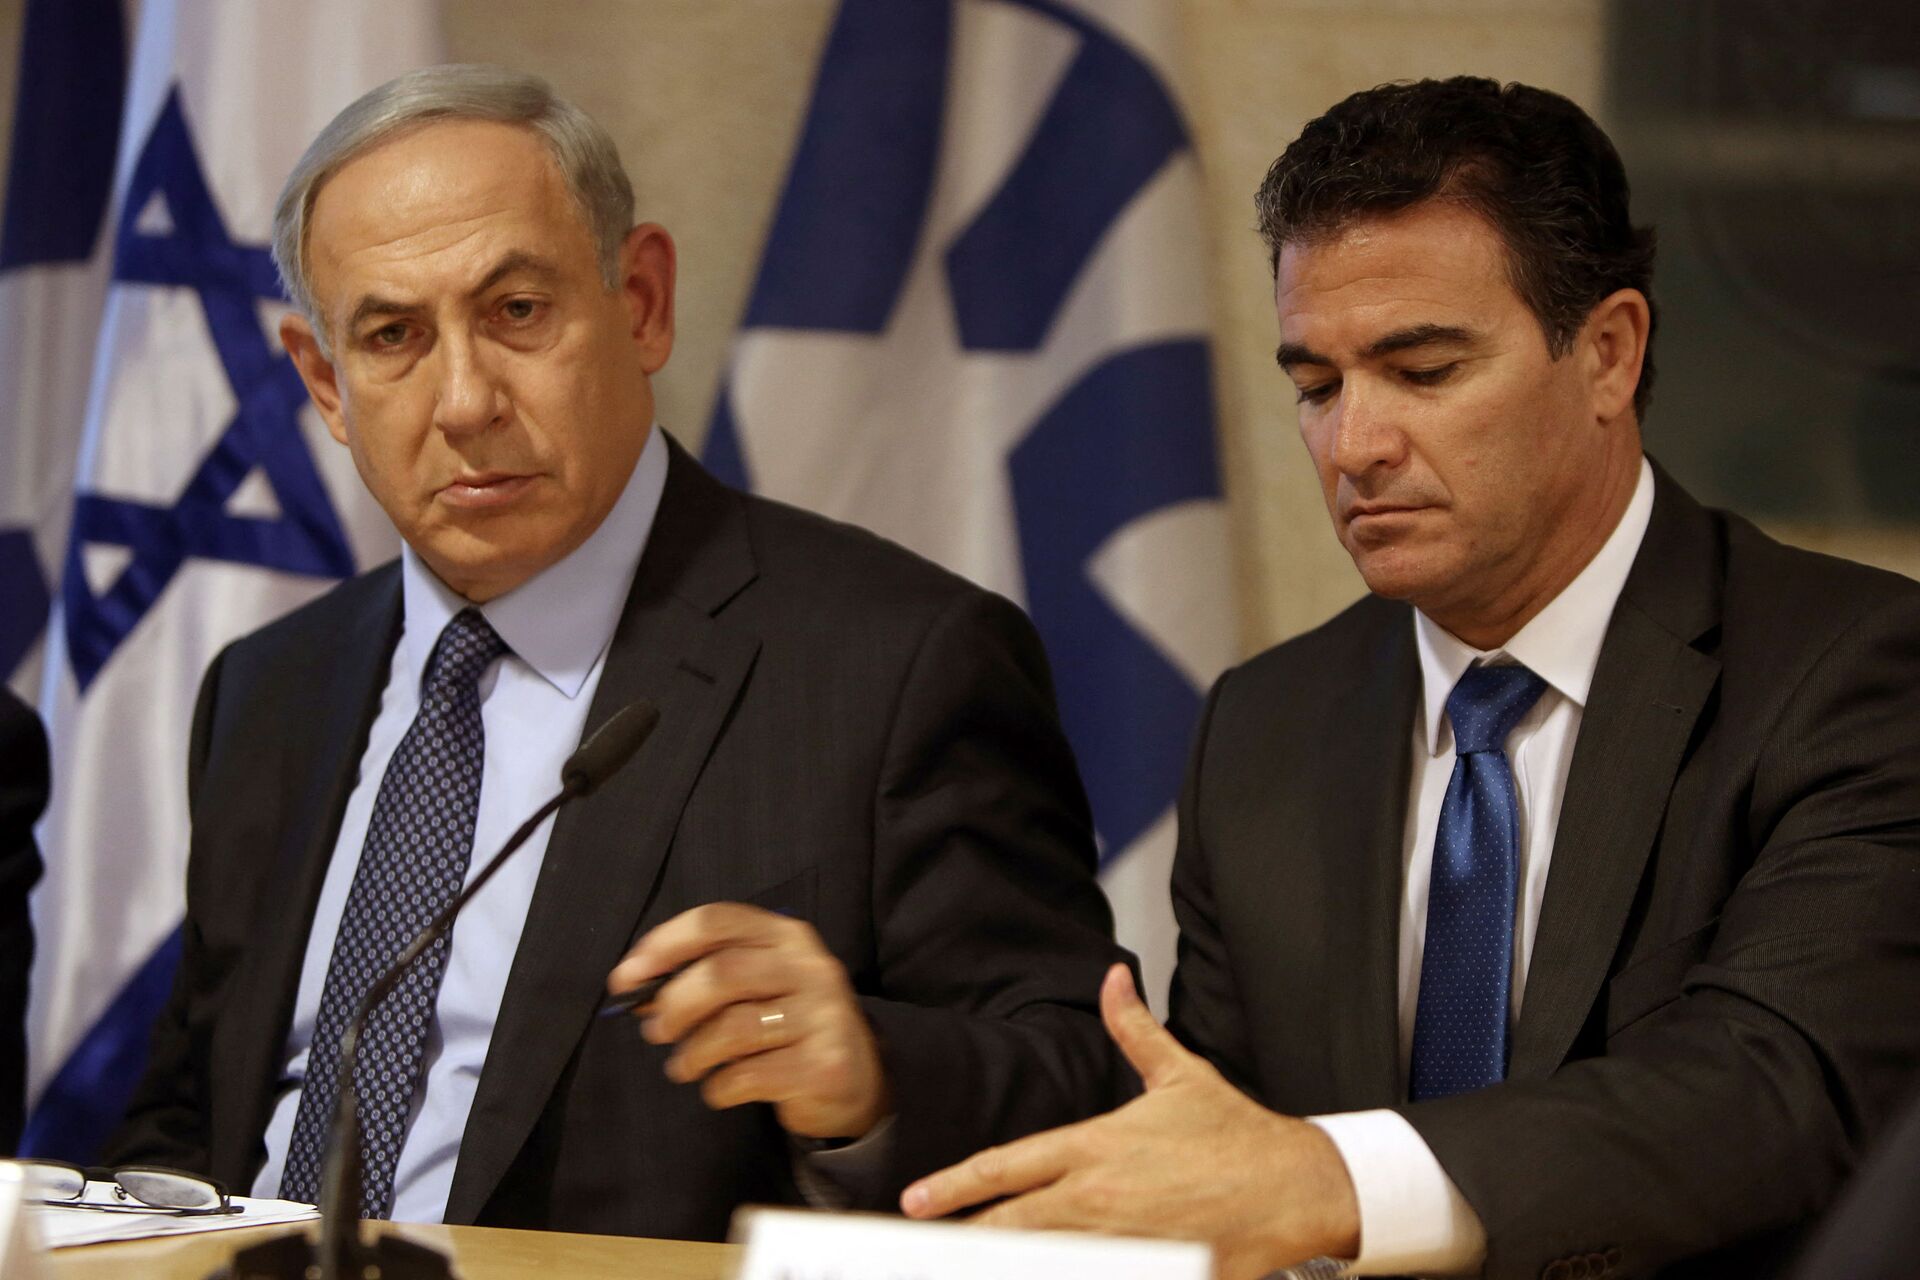 A file picture taken at the Israeli foreign ministry on October 15, 2015, shows Prime Minister Benjamin Netanyahu (L) sitting next to Yossi Cohen, who is currently the head of Israel's National Security Council, and who was named as the 12th head of the Mossad intelligence agency by Netanyahu on December 7, 2015. - Sputnik International, 1920, 07.09.2021